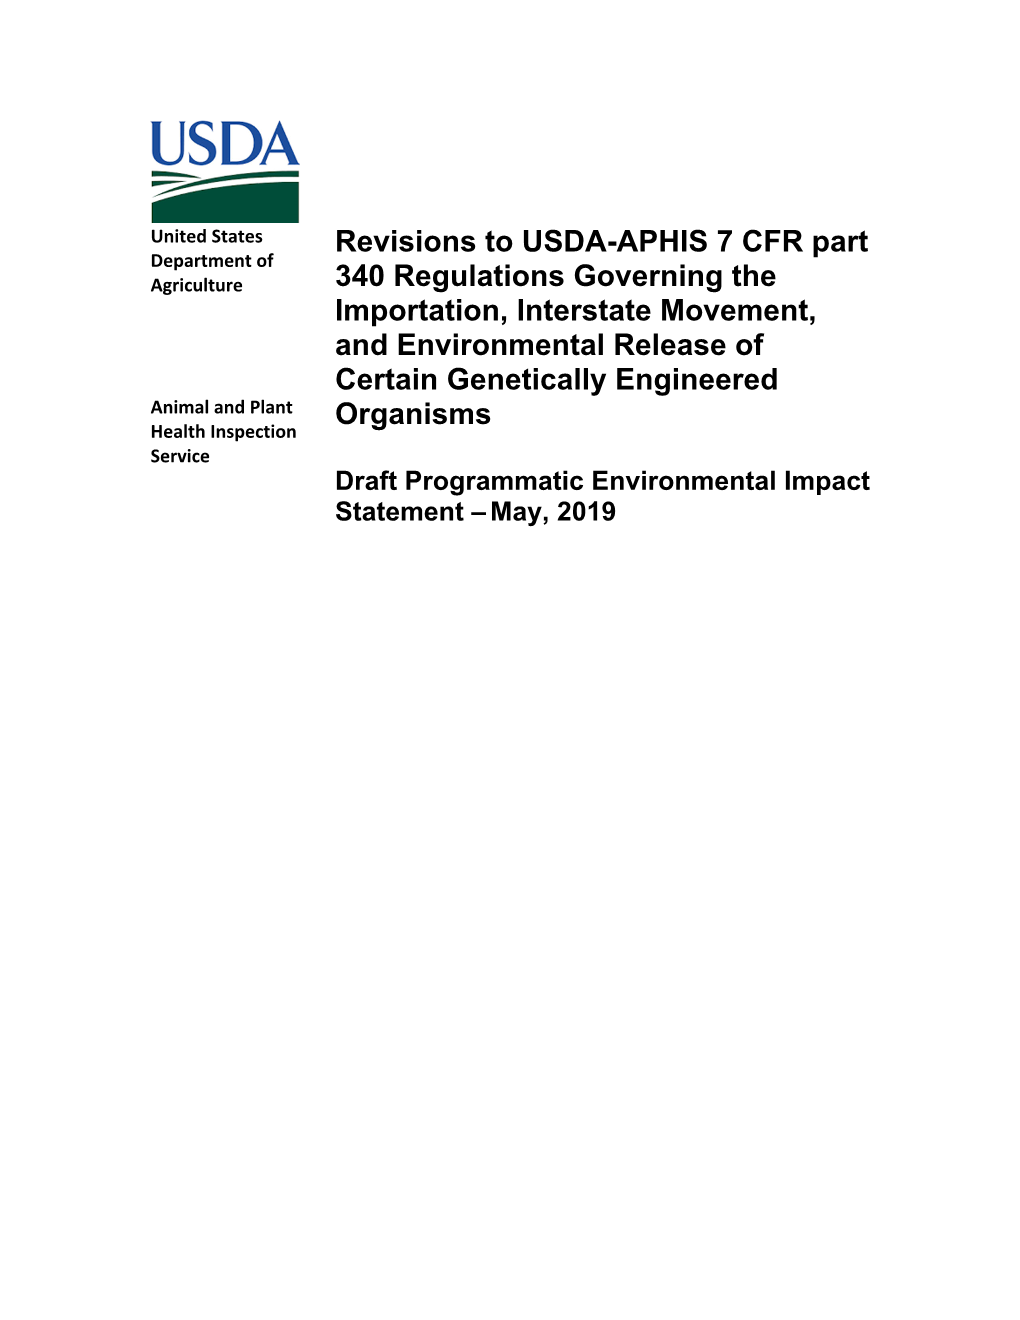 Revisions to USDA-APHIS 7 CFR Part 340 Regulations Governing The